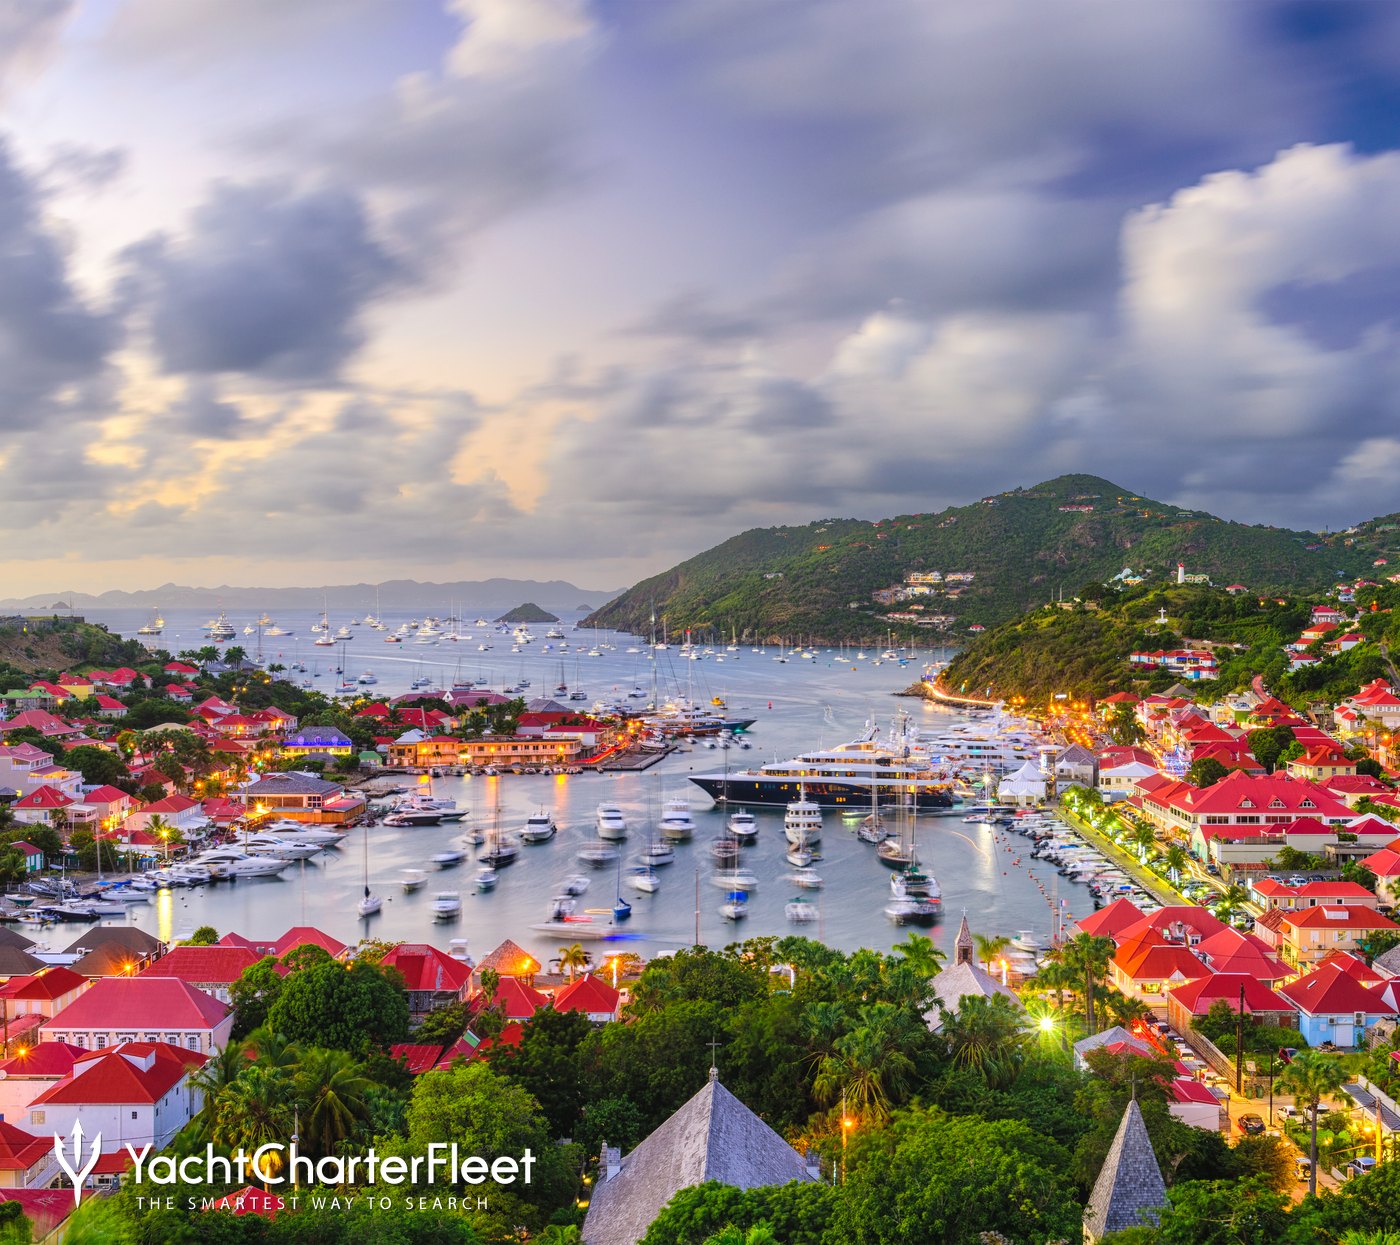 THE 10 BEST St. Barthelemy Shopping Centers & Stores (2023)